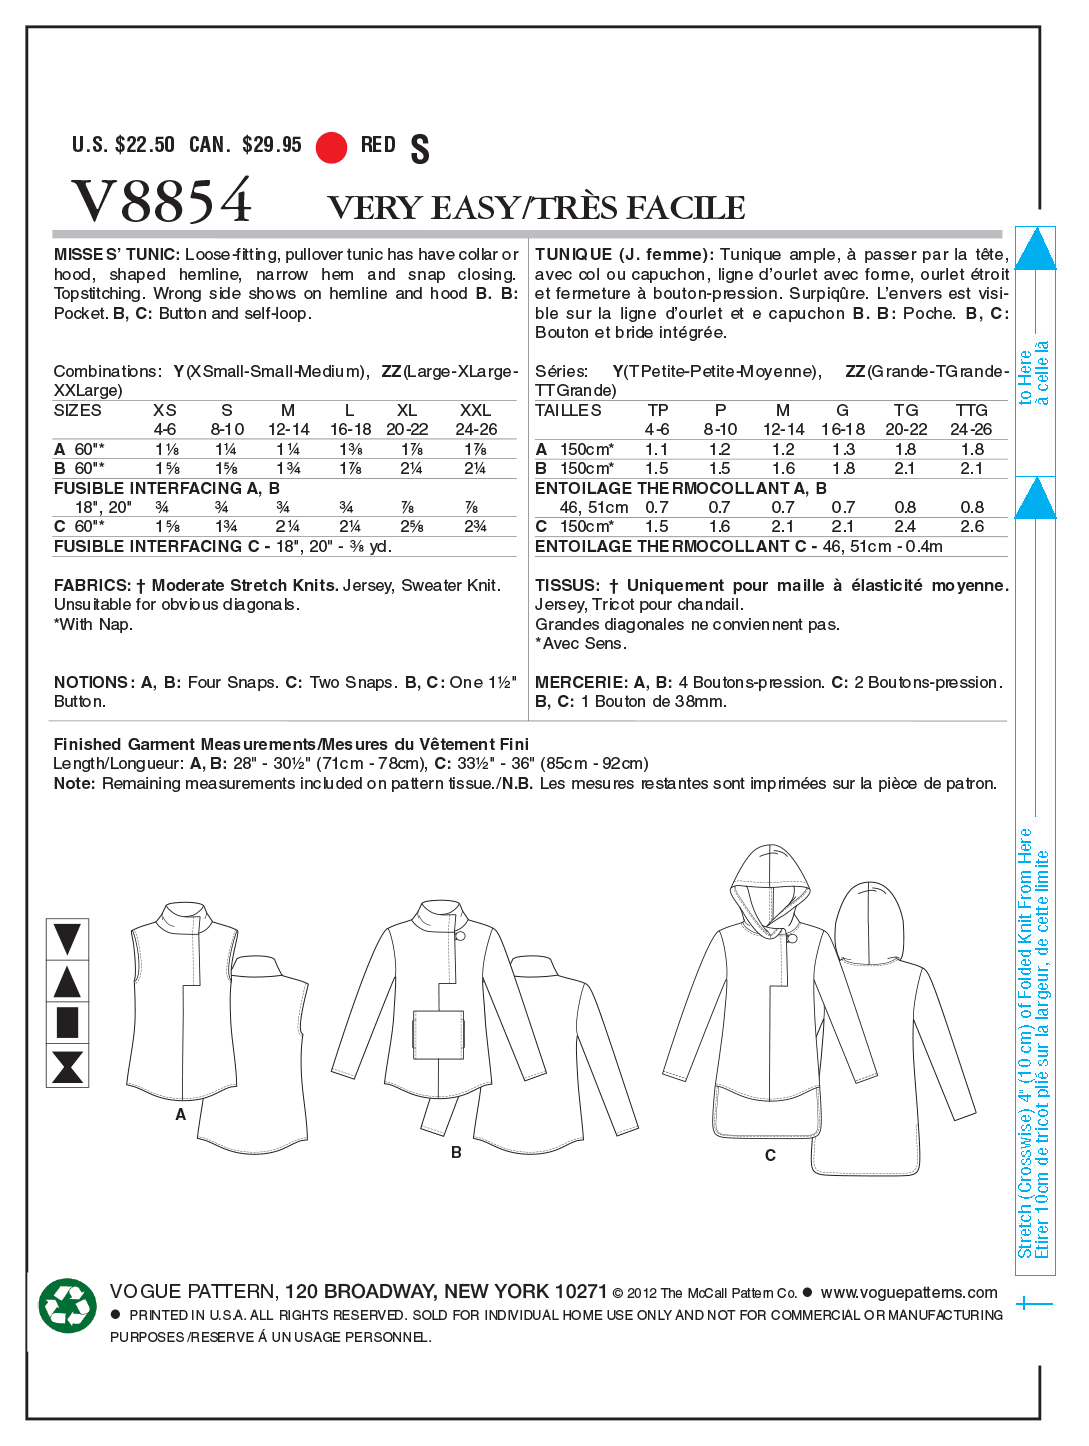 Vogue Pattern 8854 Misses' Tunic | Very Easy from Jaycotts Sewing Supplies